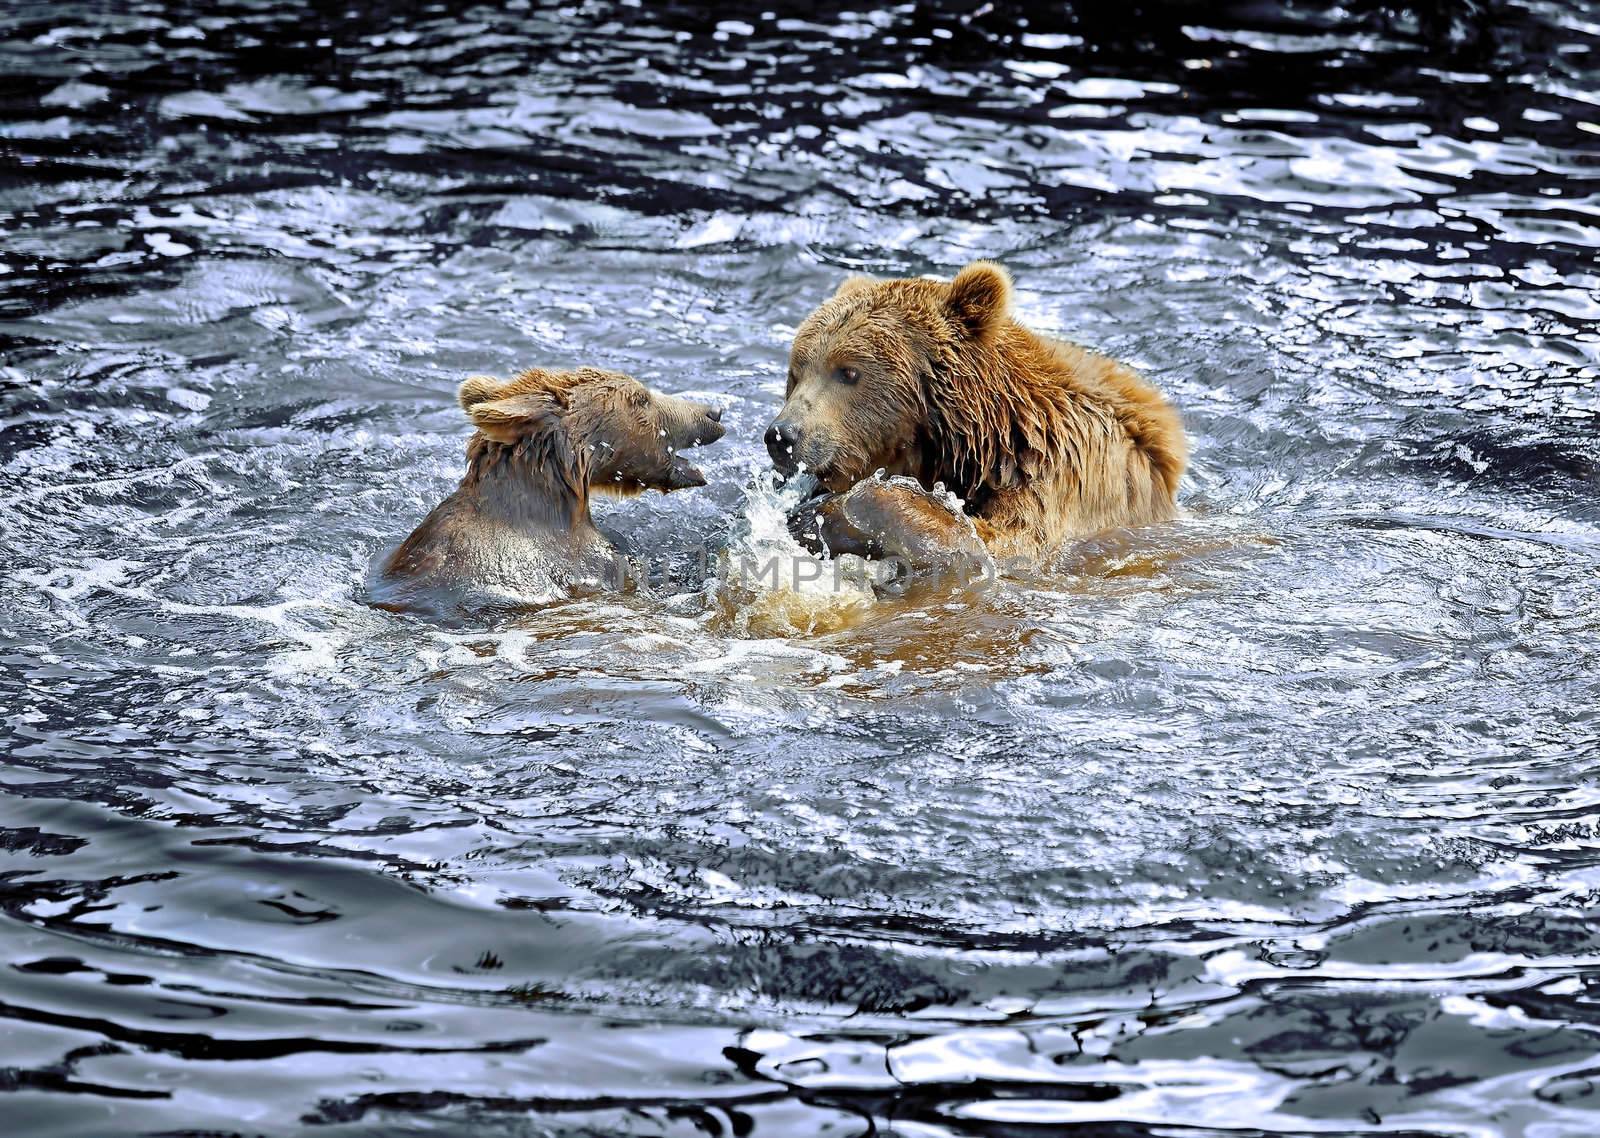 Mother and child bear playing in the water